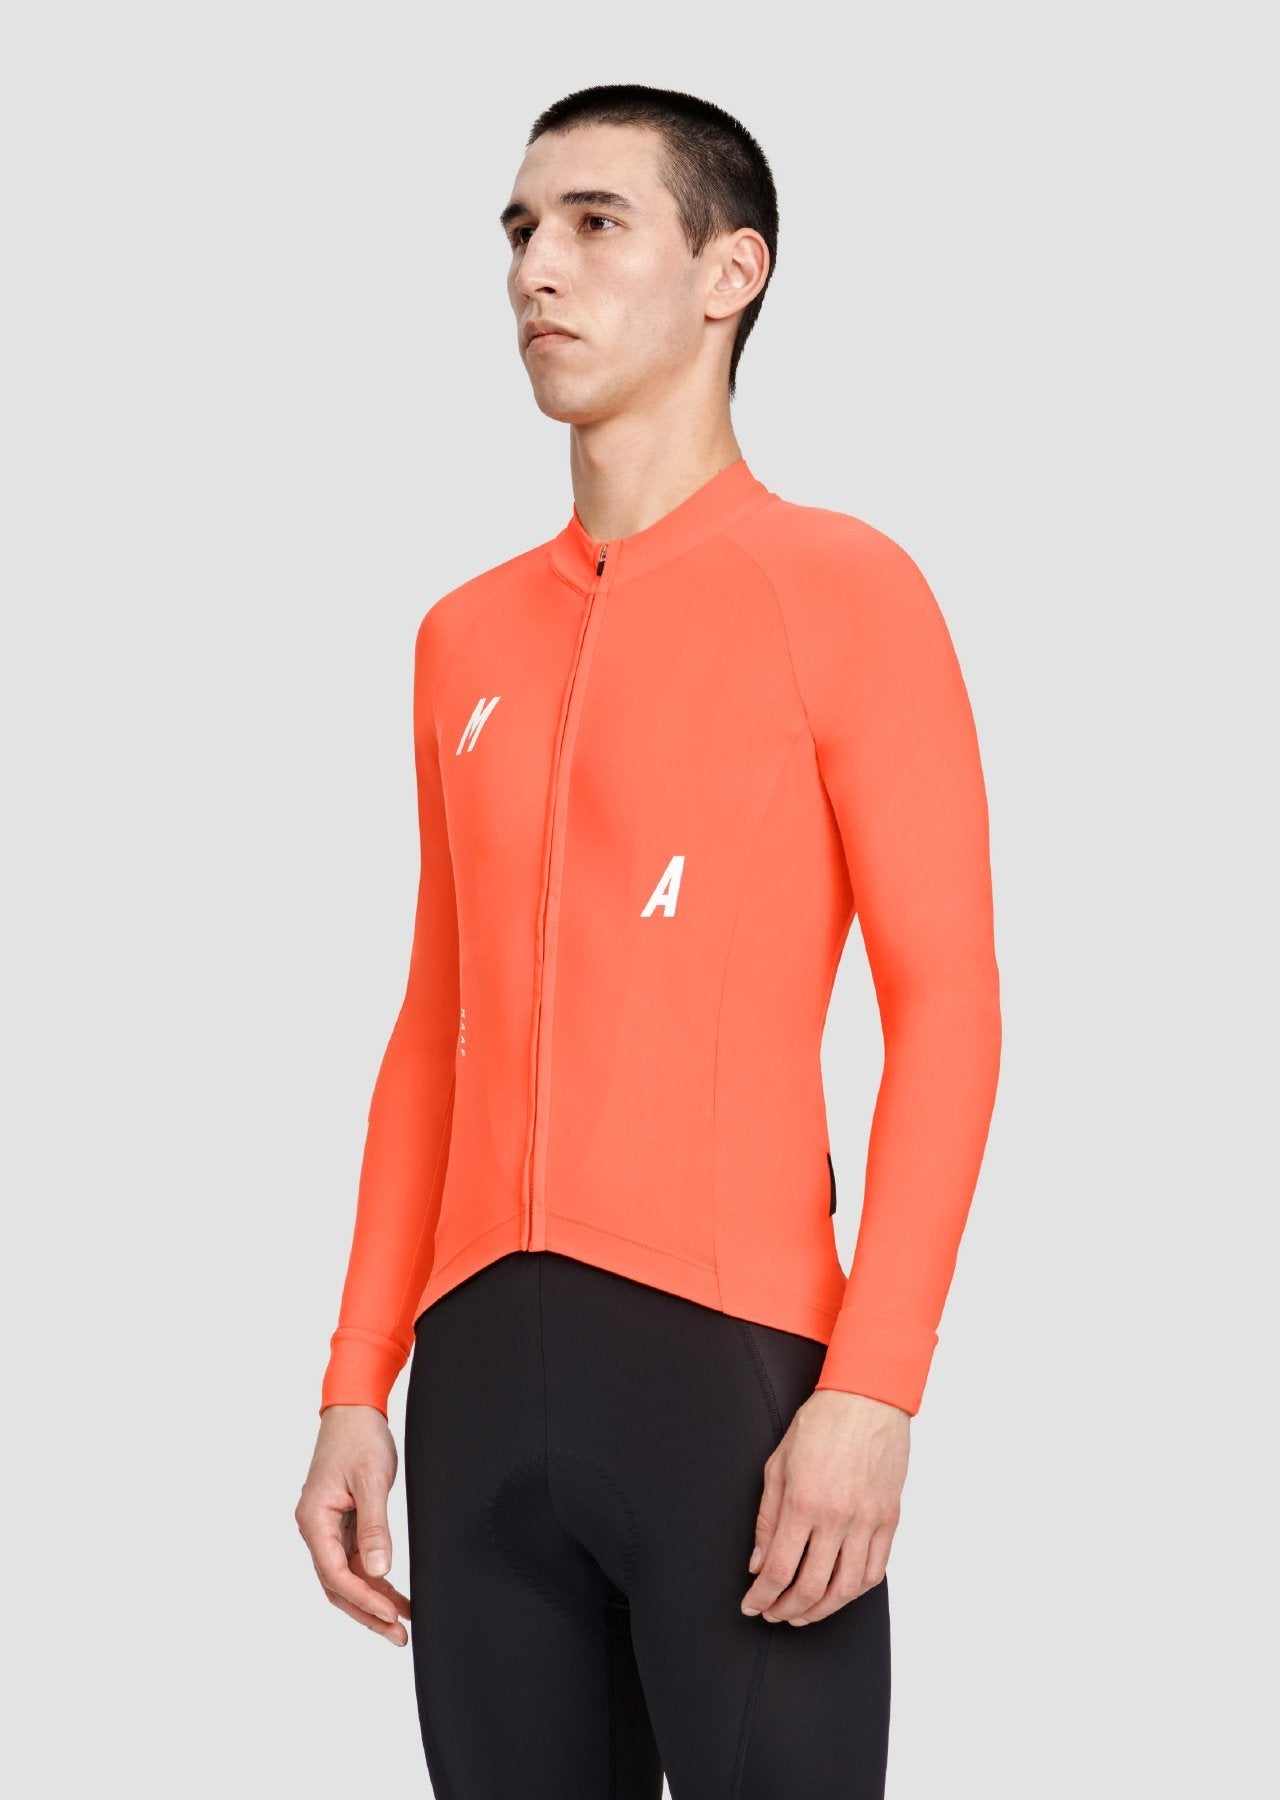 Training Thermal LS Jersey - MAAP Cycling Apparel